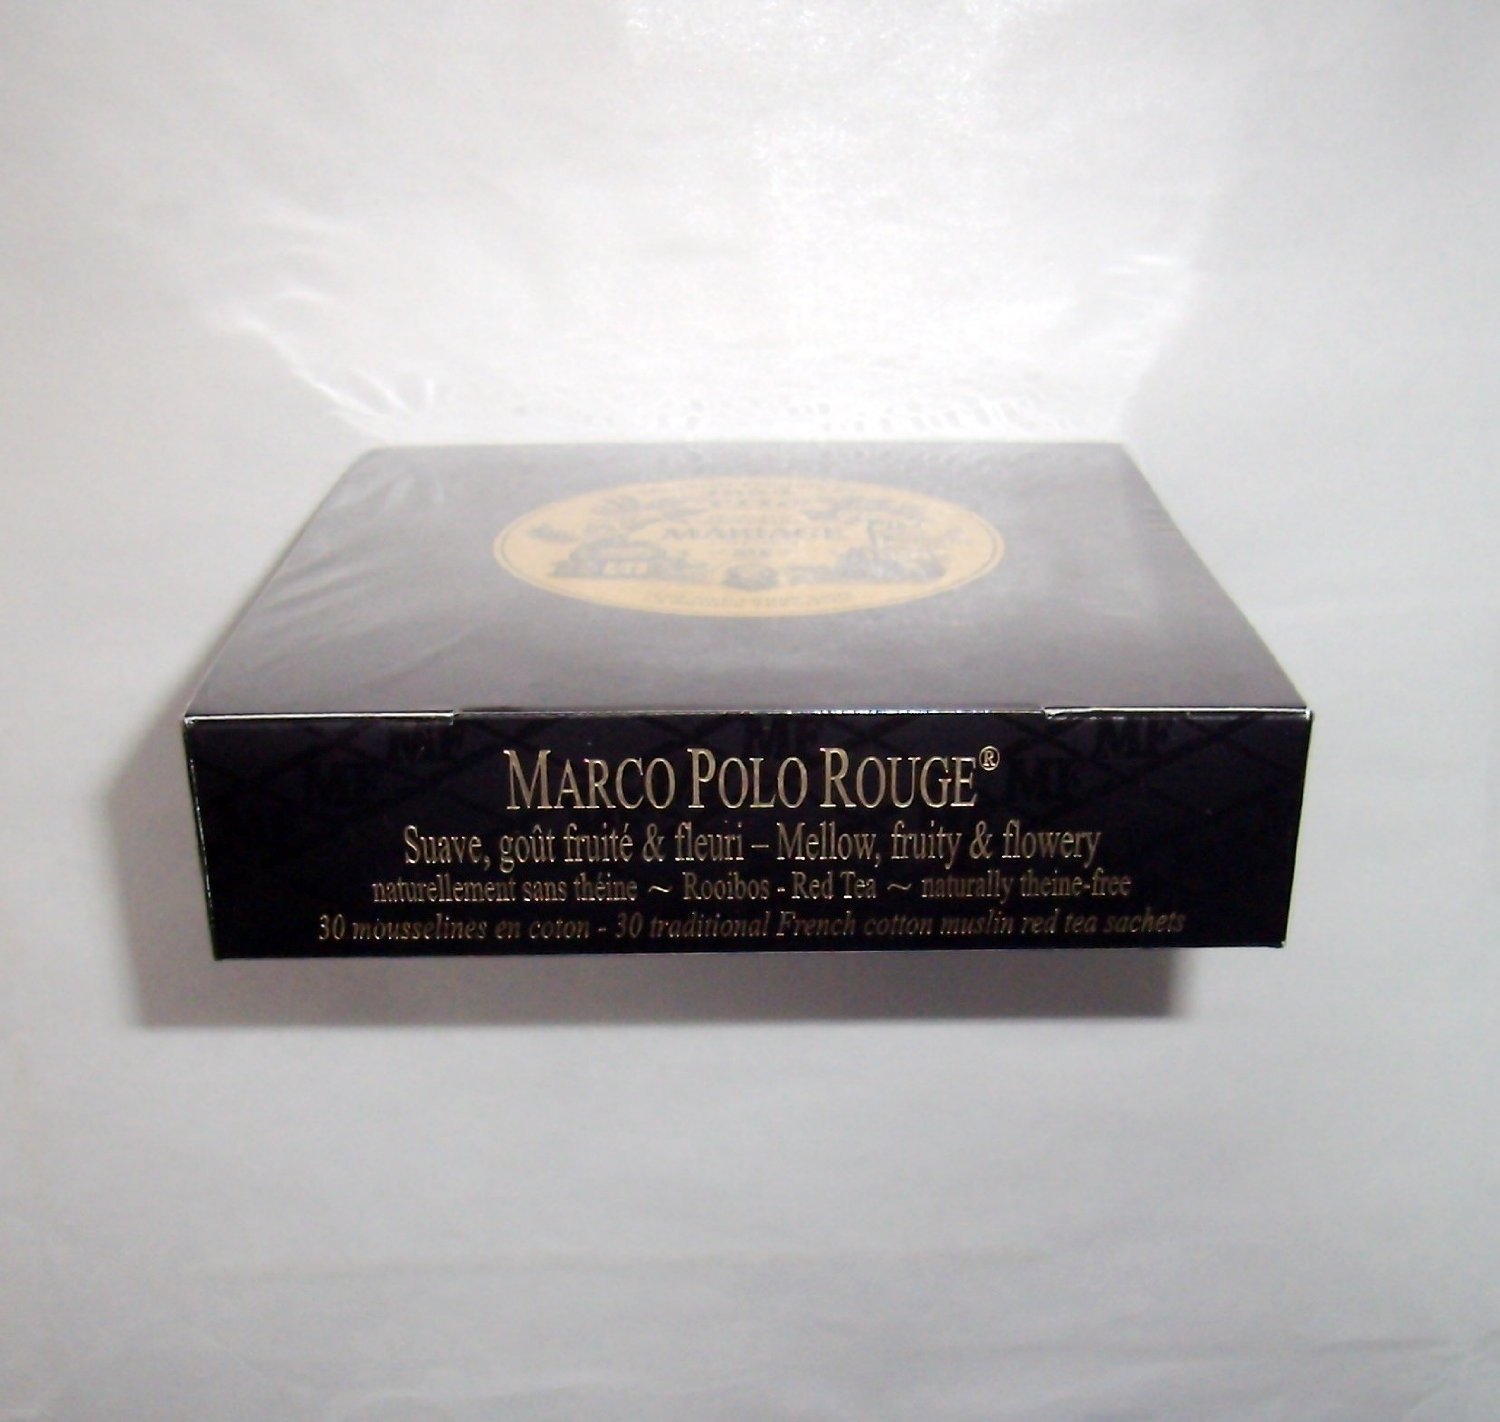 Mariage Frères - MARCO POLO ROUGE - Box of 30 traditional french muslin tea sachets